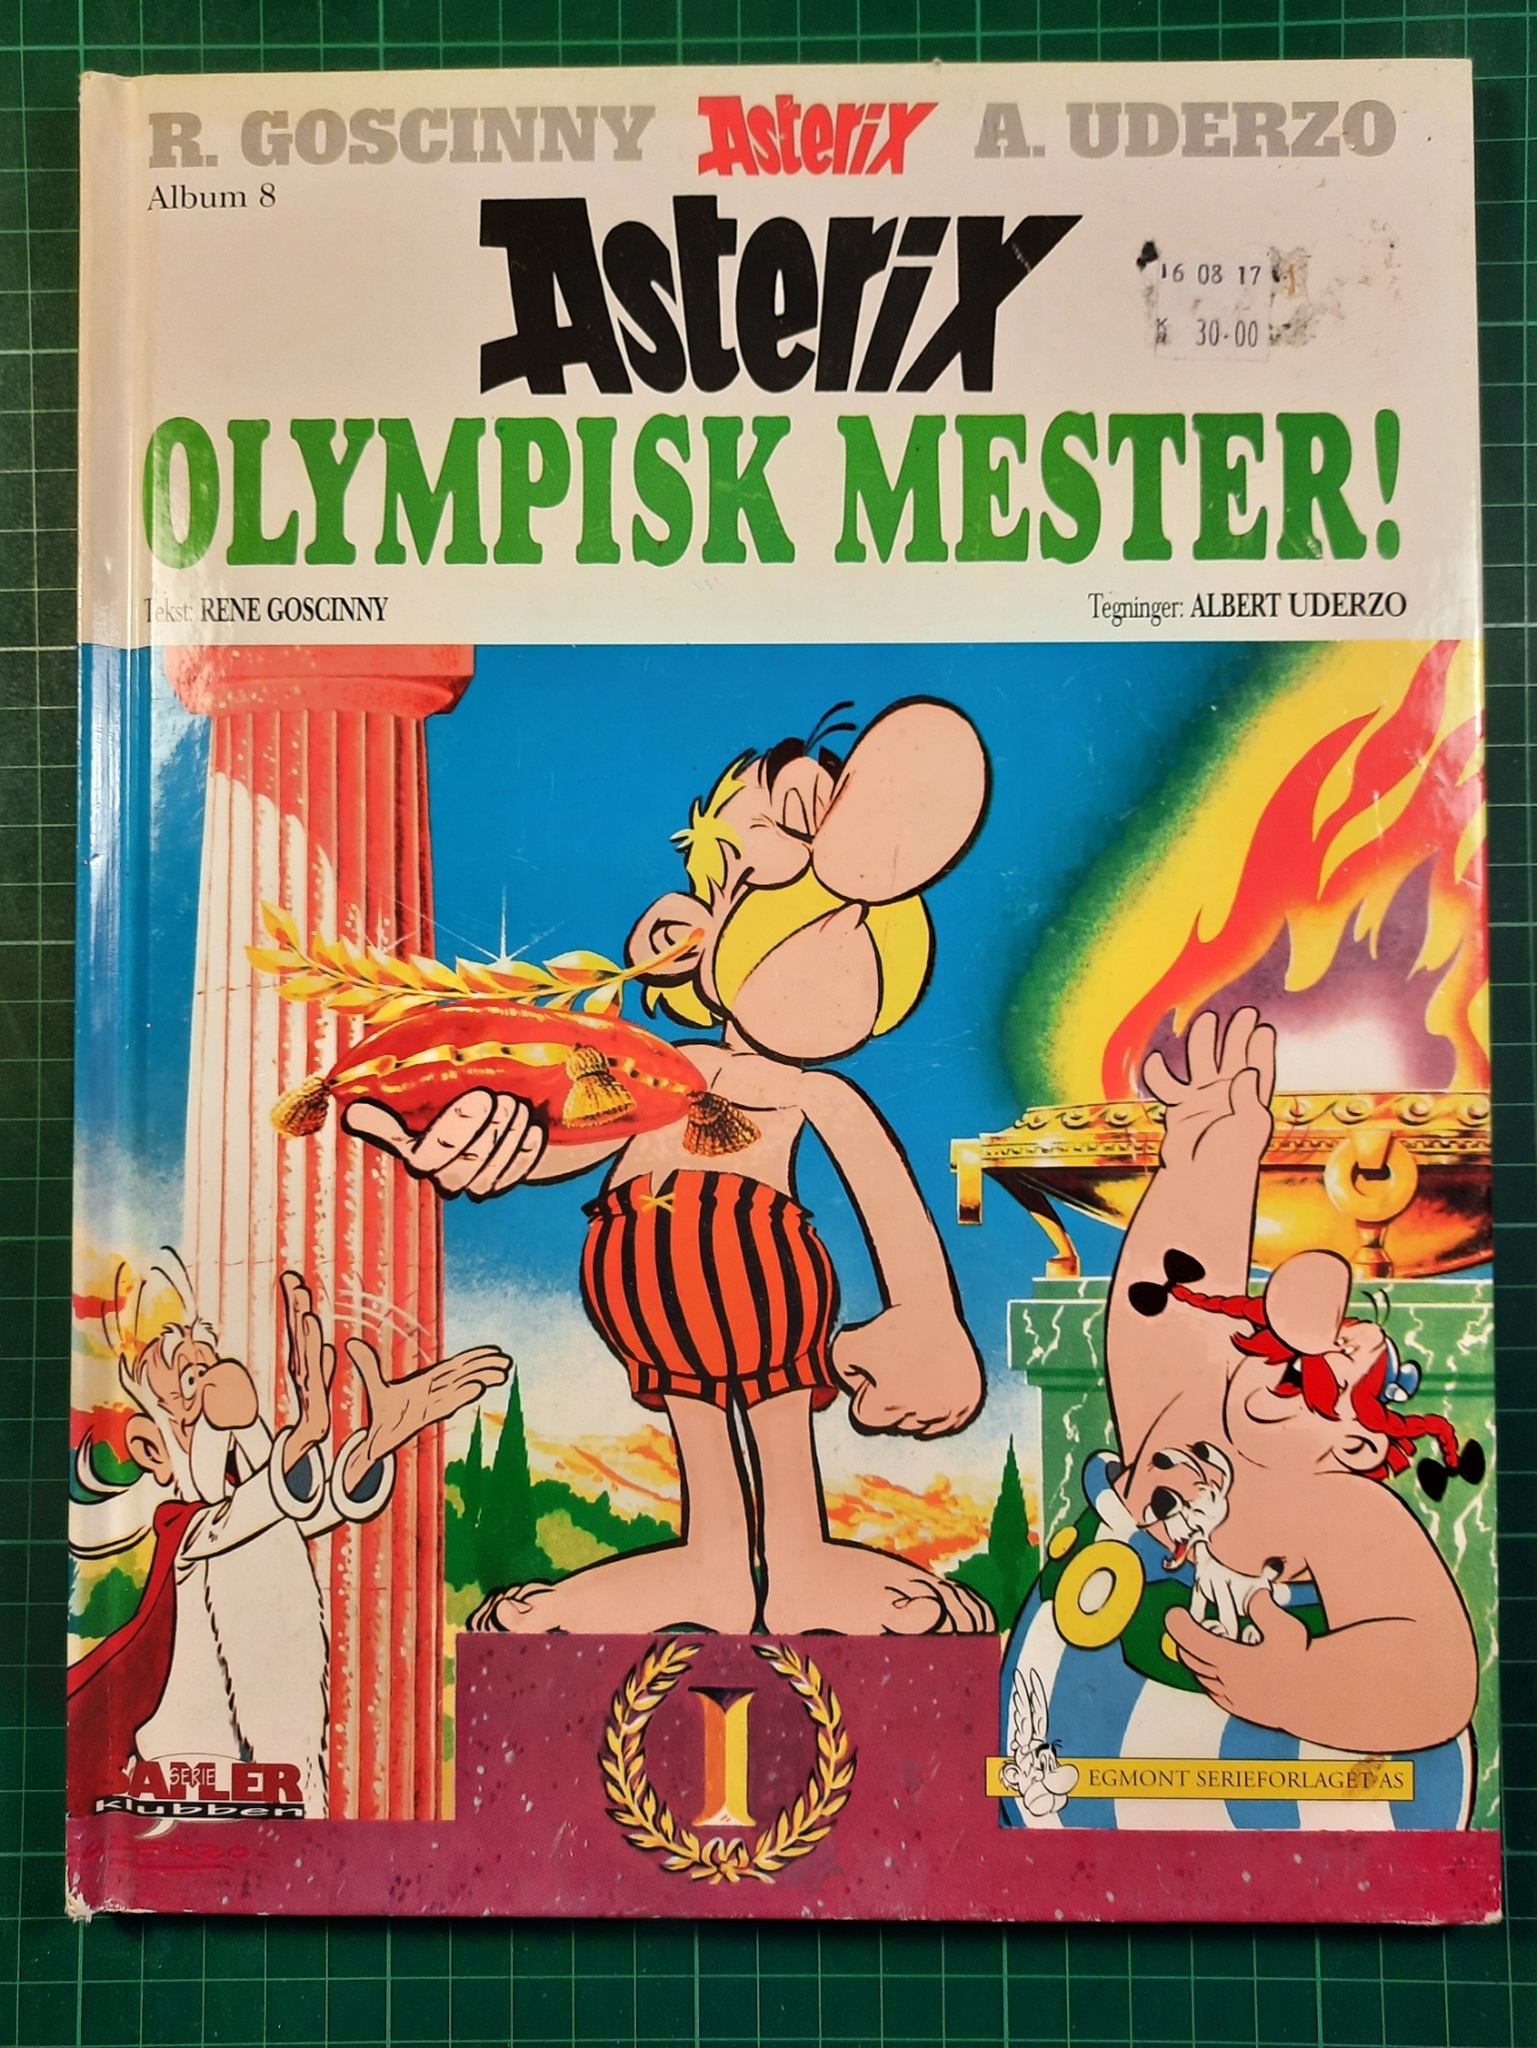 Asterix Olympisk mester!